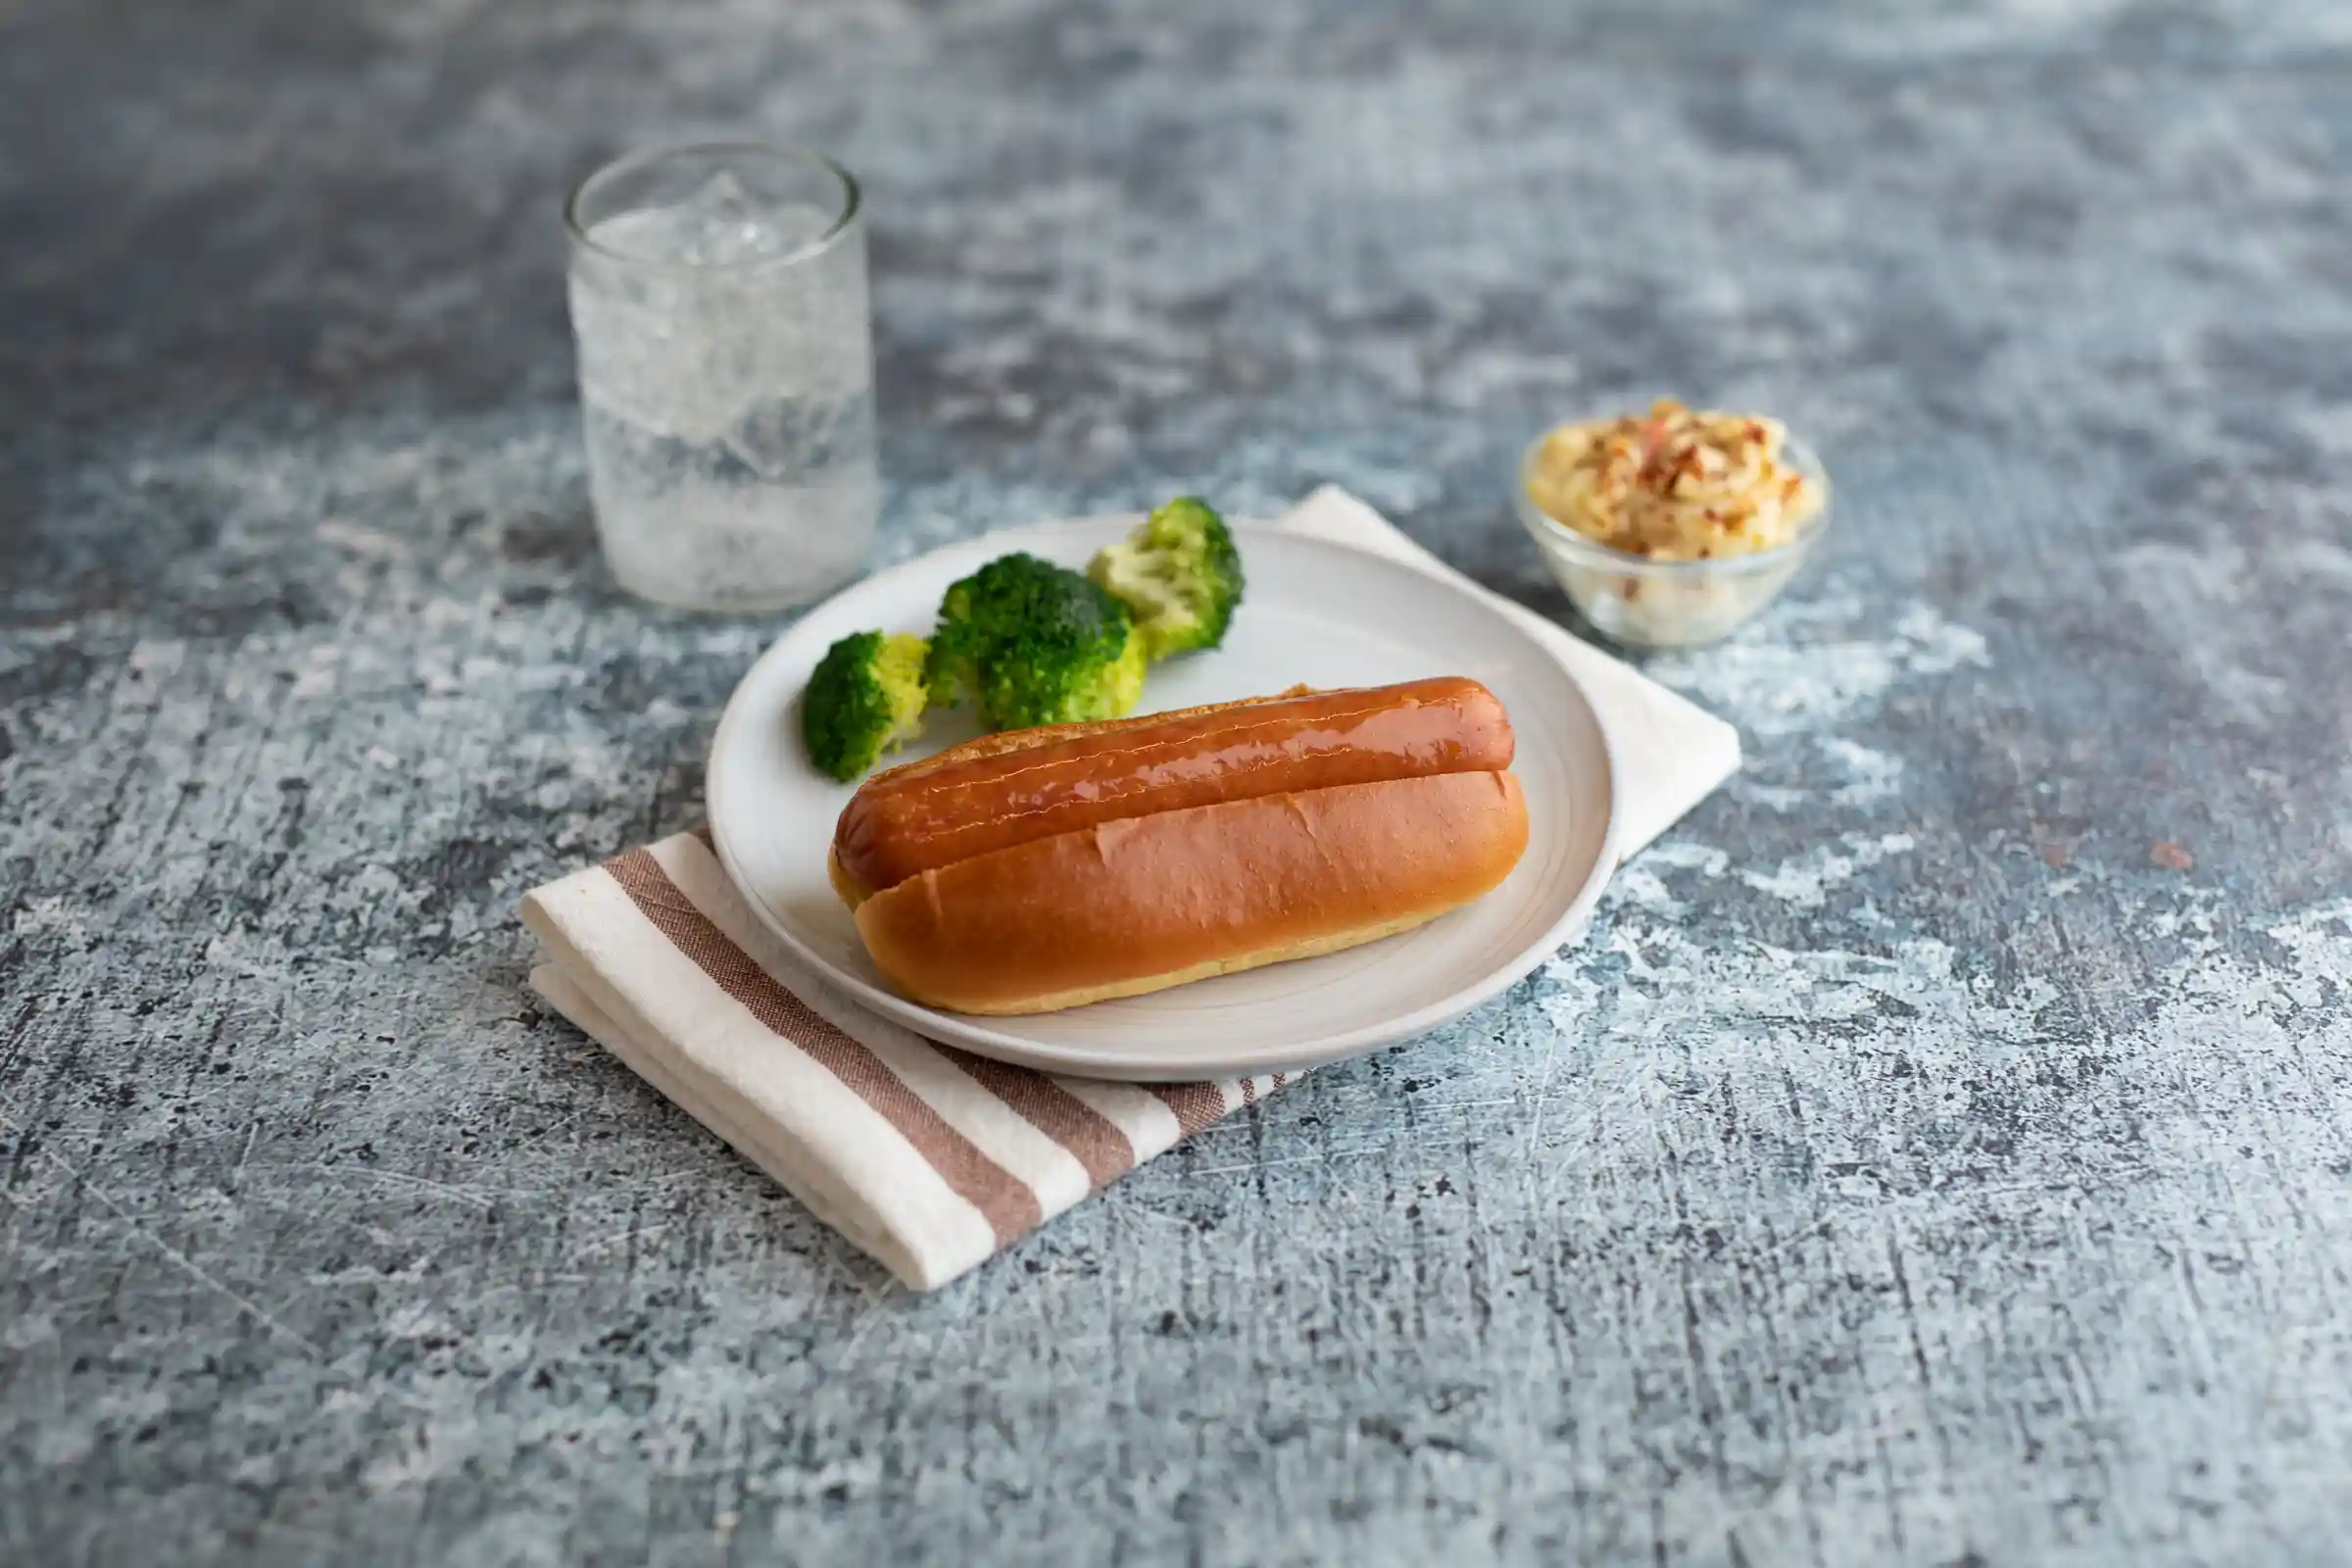 Hillshire Farm® Fully Cooked Pepperjack Skinless Dinner Sausage Links, 5:1 Links Per Pound, 6 Inch, Frozenhttps://images.salsify.com/image/upload/s--Tcb0xCNe--/q_25/gfw7wvpaknbygbp1a2fe.webp